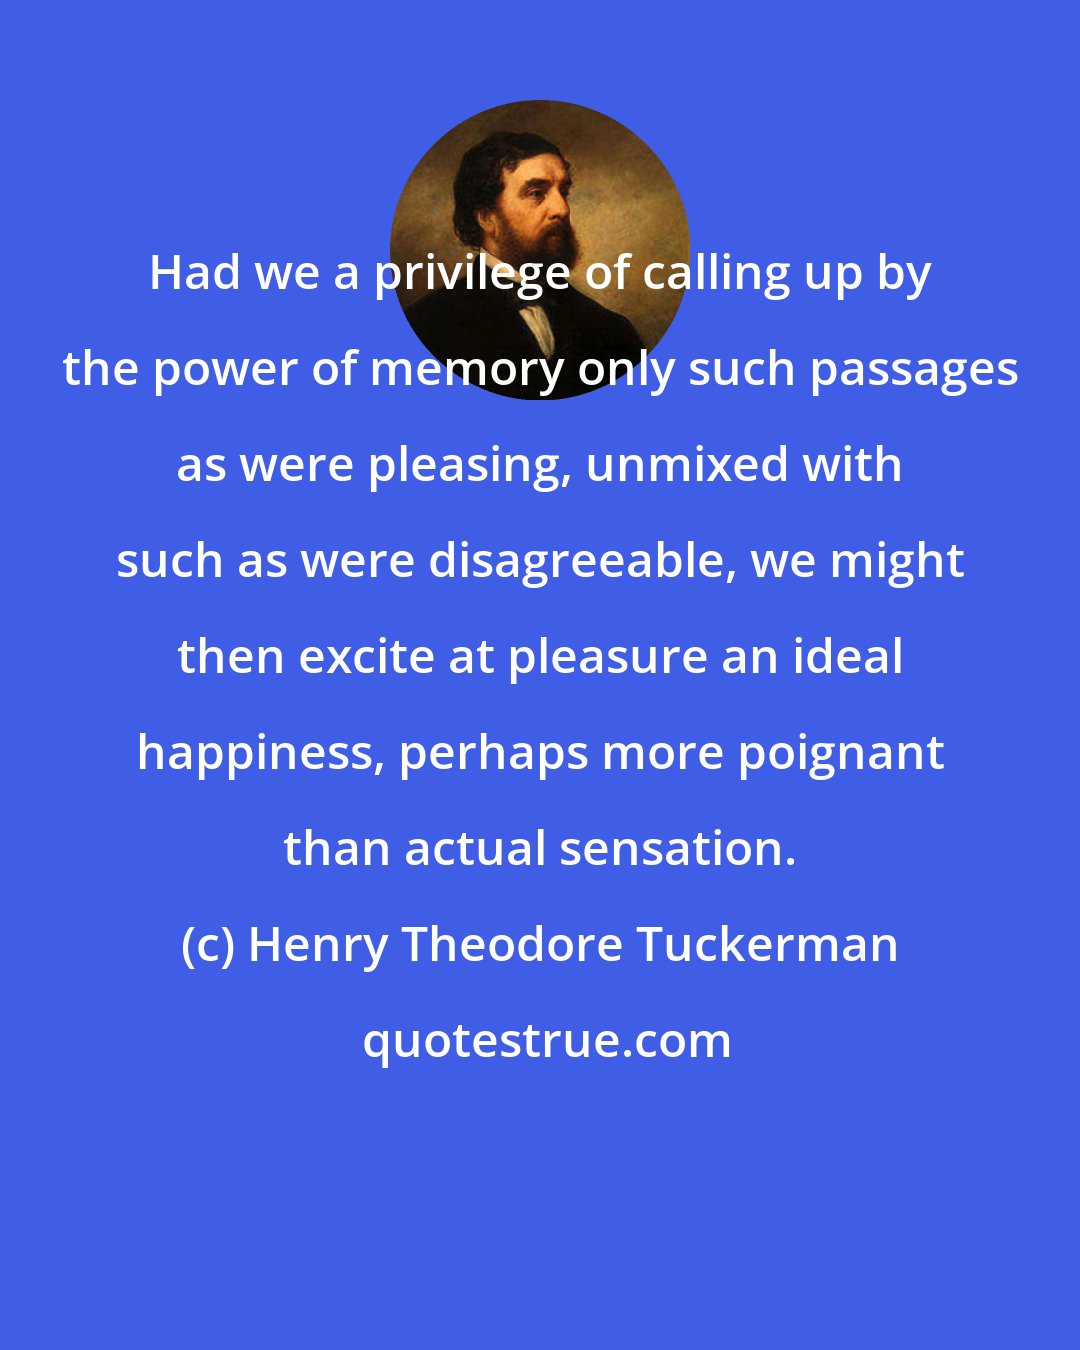 Henry Theodore Tuckerman: Had we a privilege of calling up by the power of memory only such passages as were pleasing, unmixed with such as were disagreeable, we might then excite at pleasure an ideal happiness, perhaps more poignant than actual sensation.